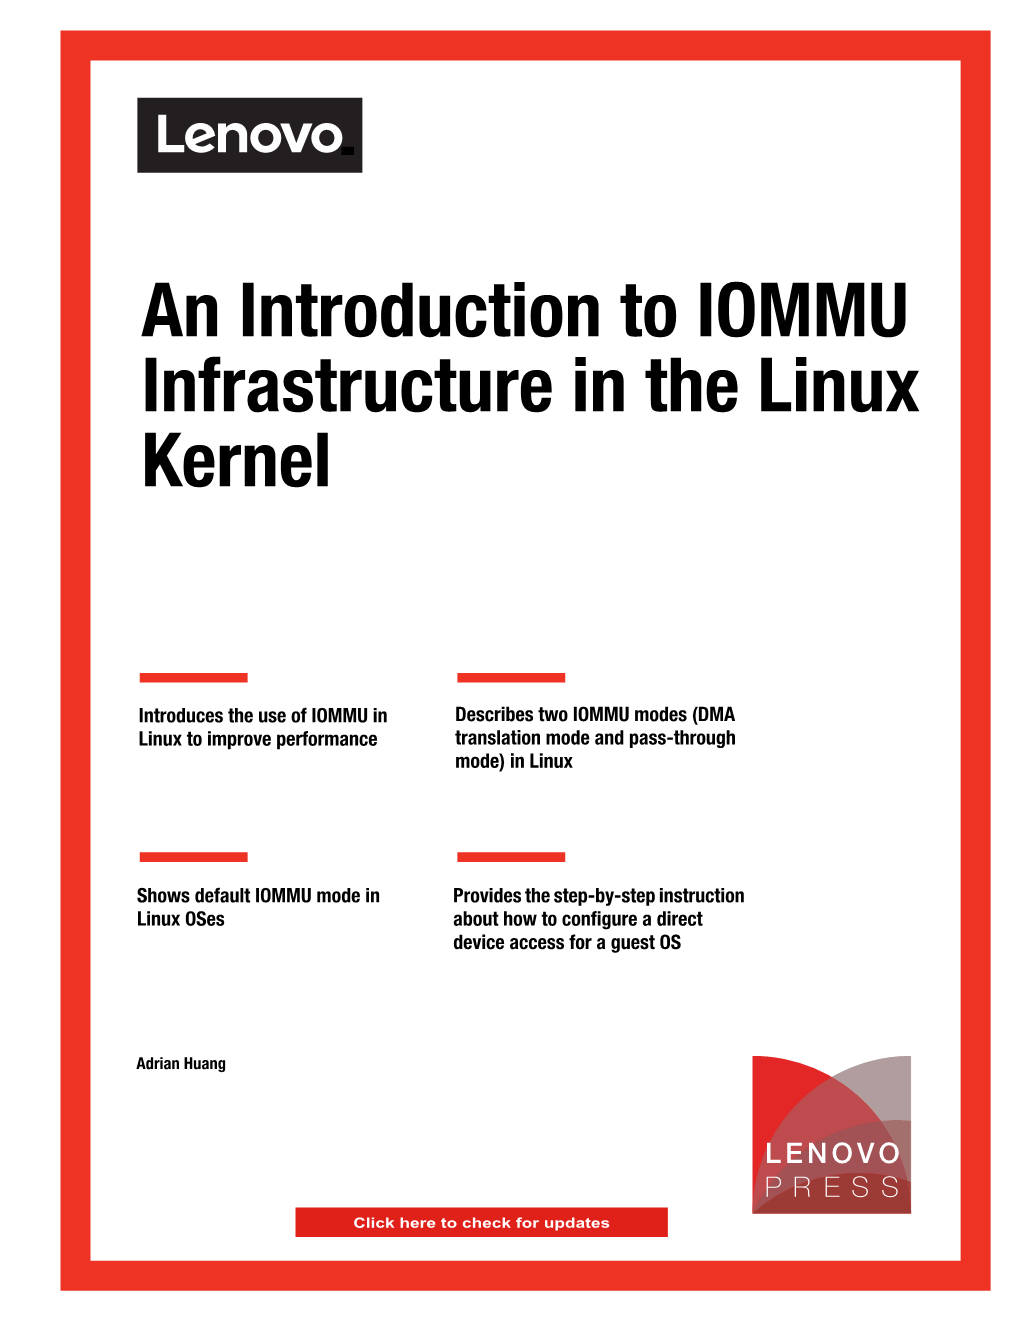 An Introduction to IOMMU Infrastructure in the Linux Kernel